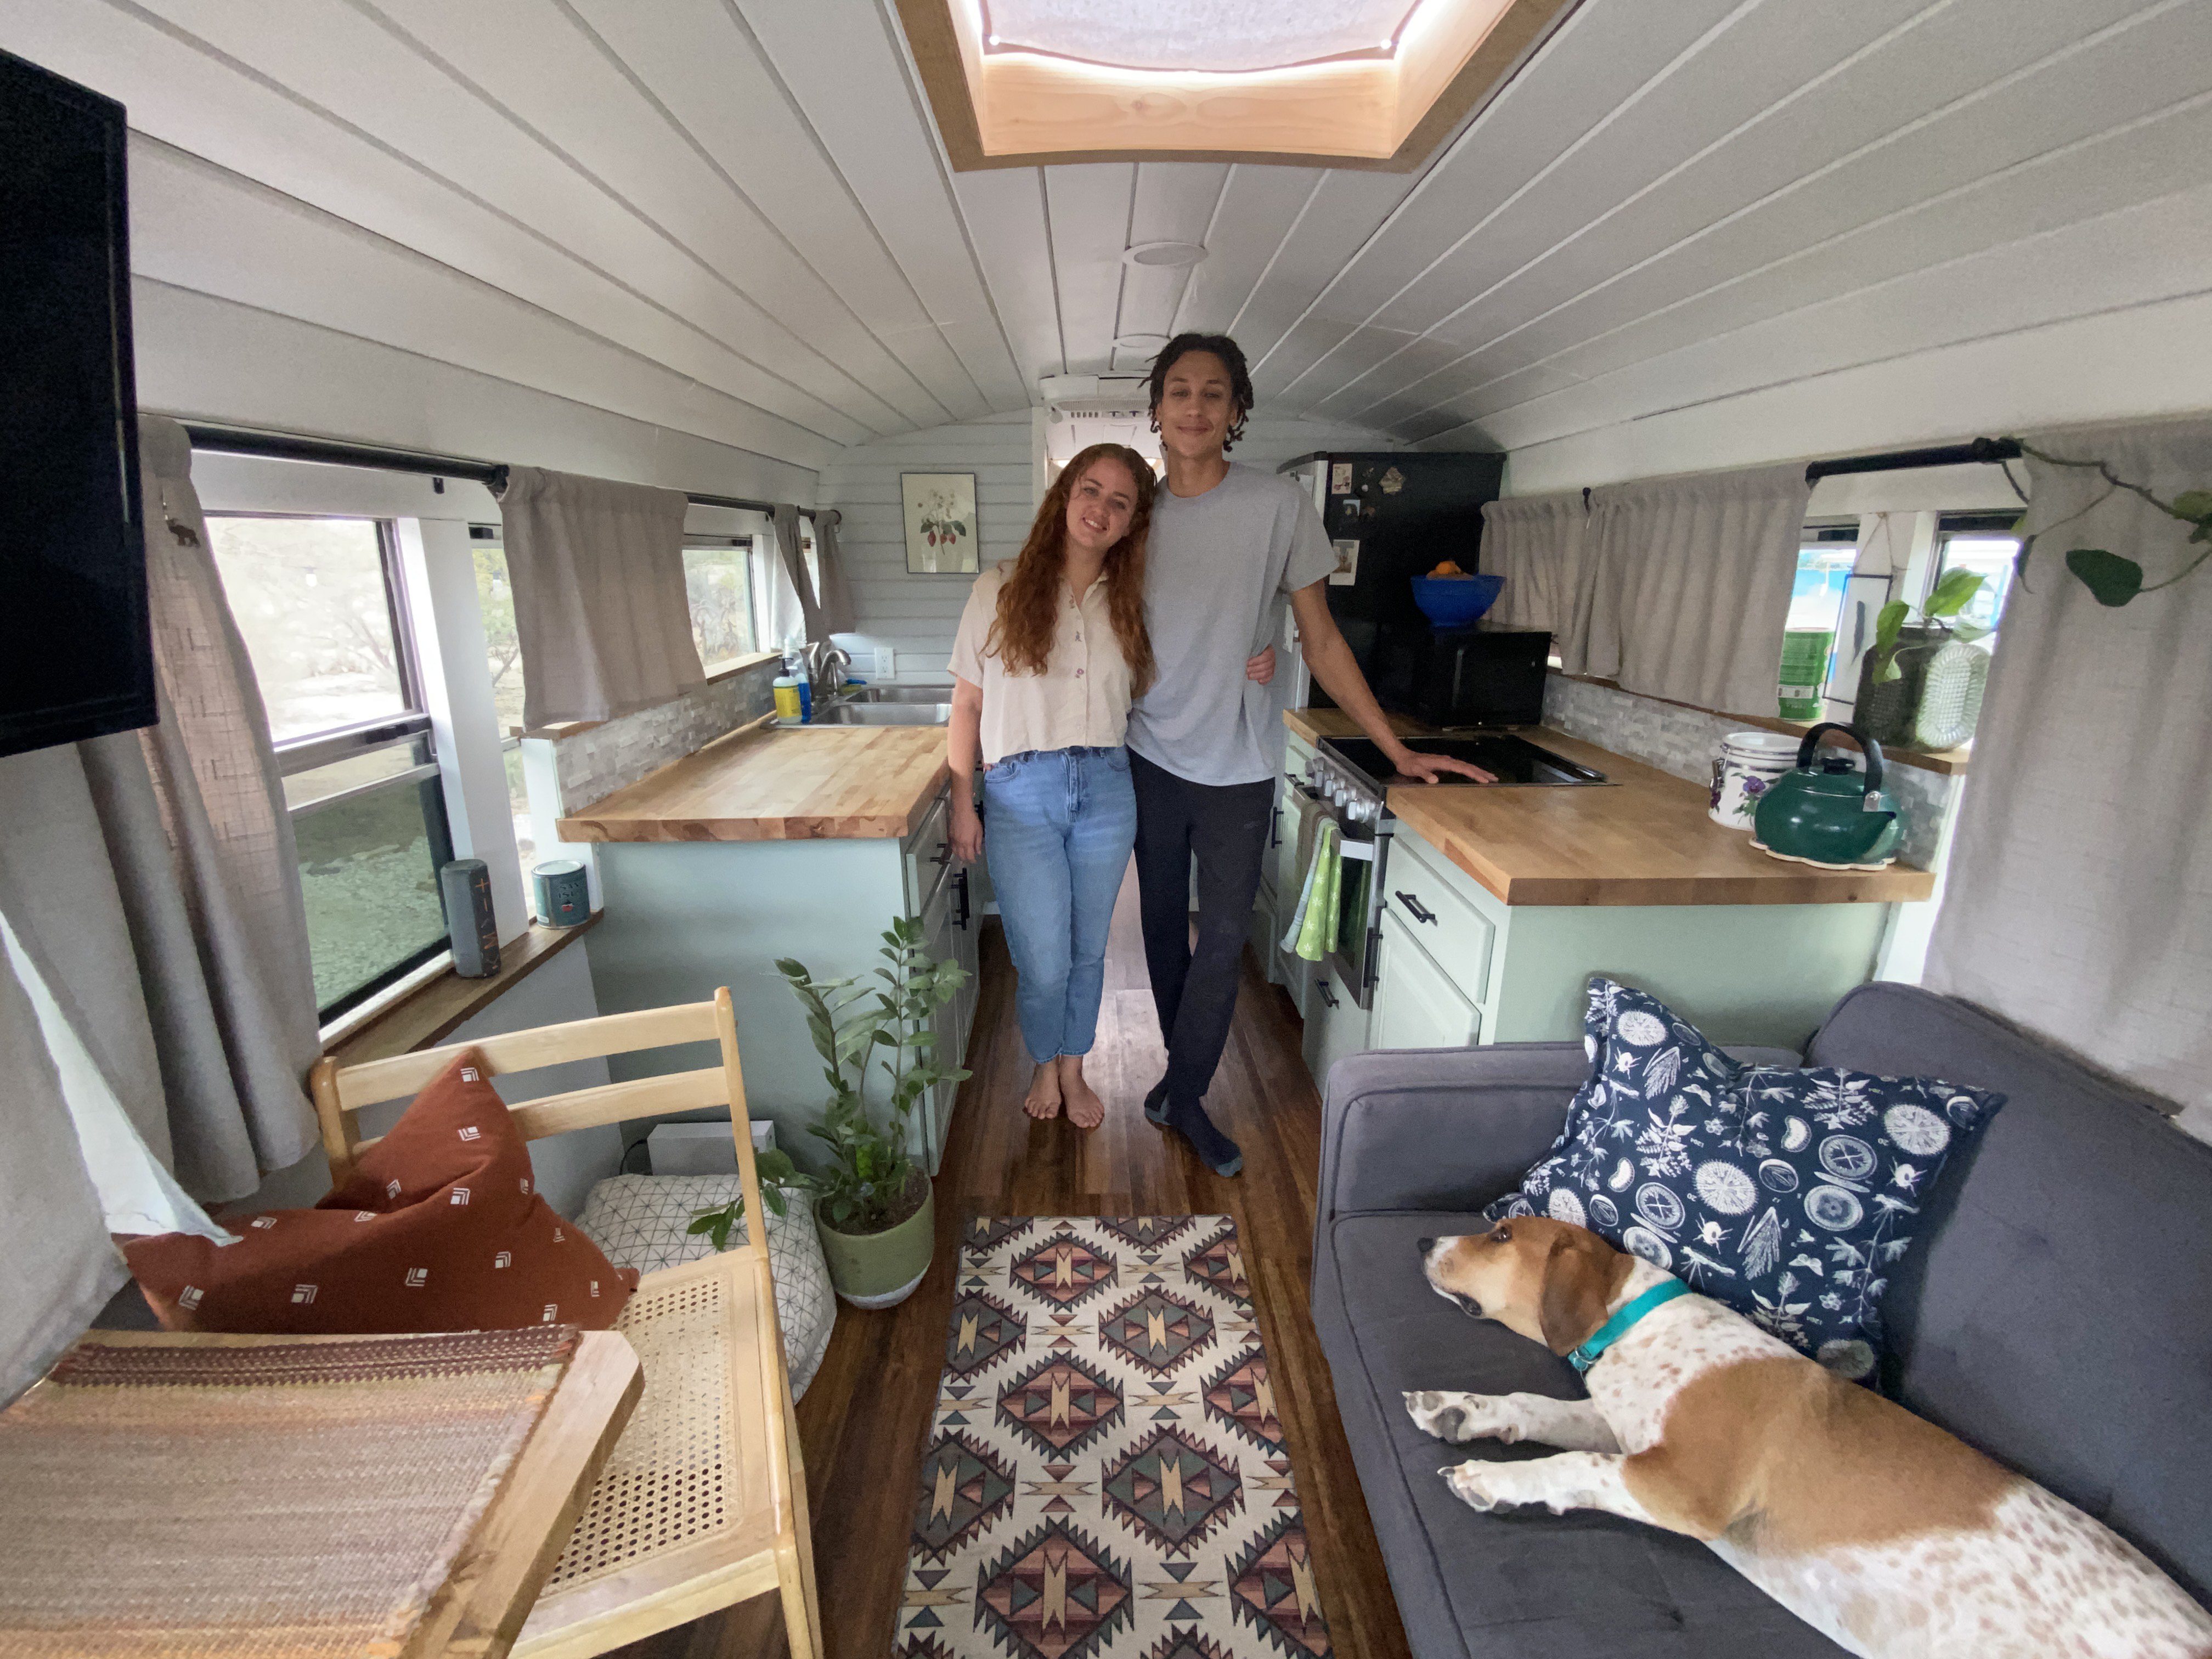 Camping in a School Bus, This RV Renovation Pushes the Limits